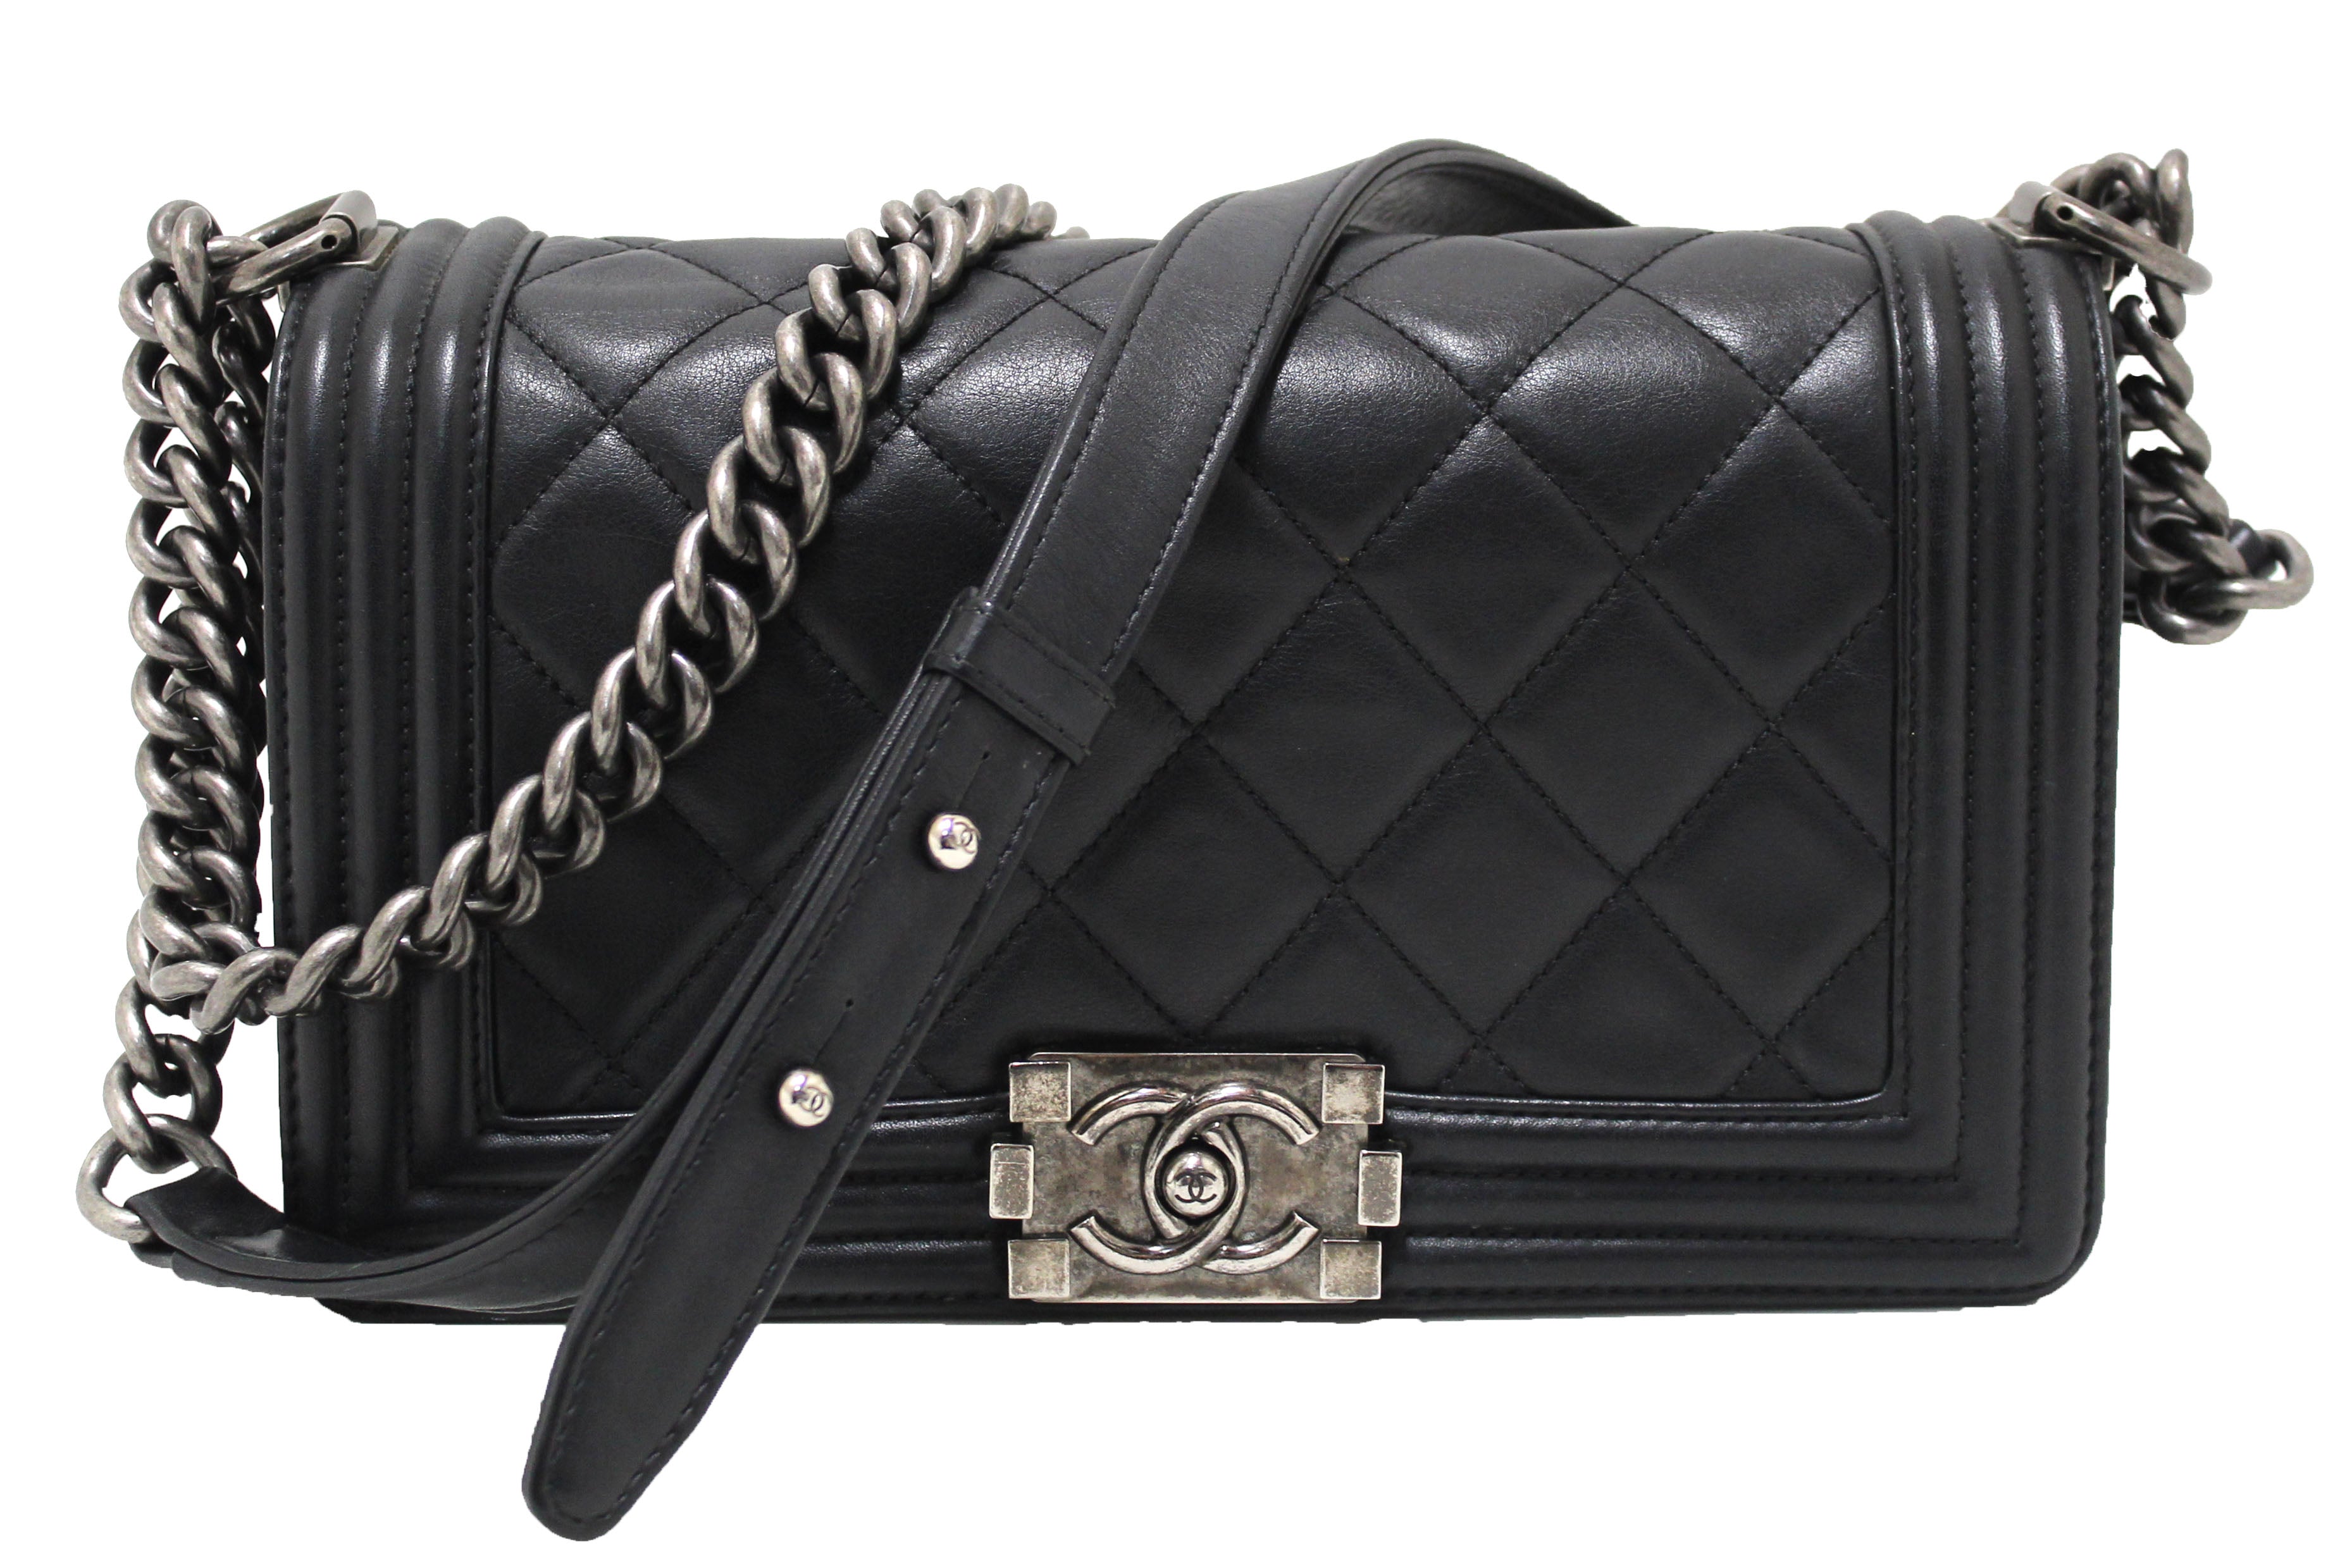 Chanel Boy Bag: The 'It-Girl' Staple, Handbags and Accessories